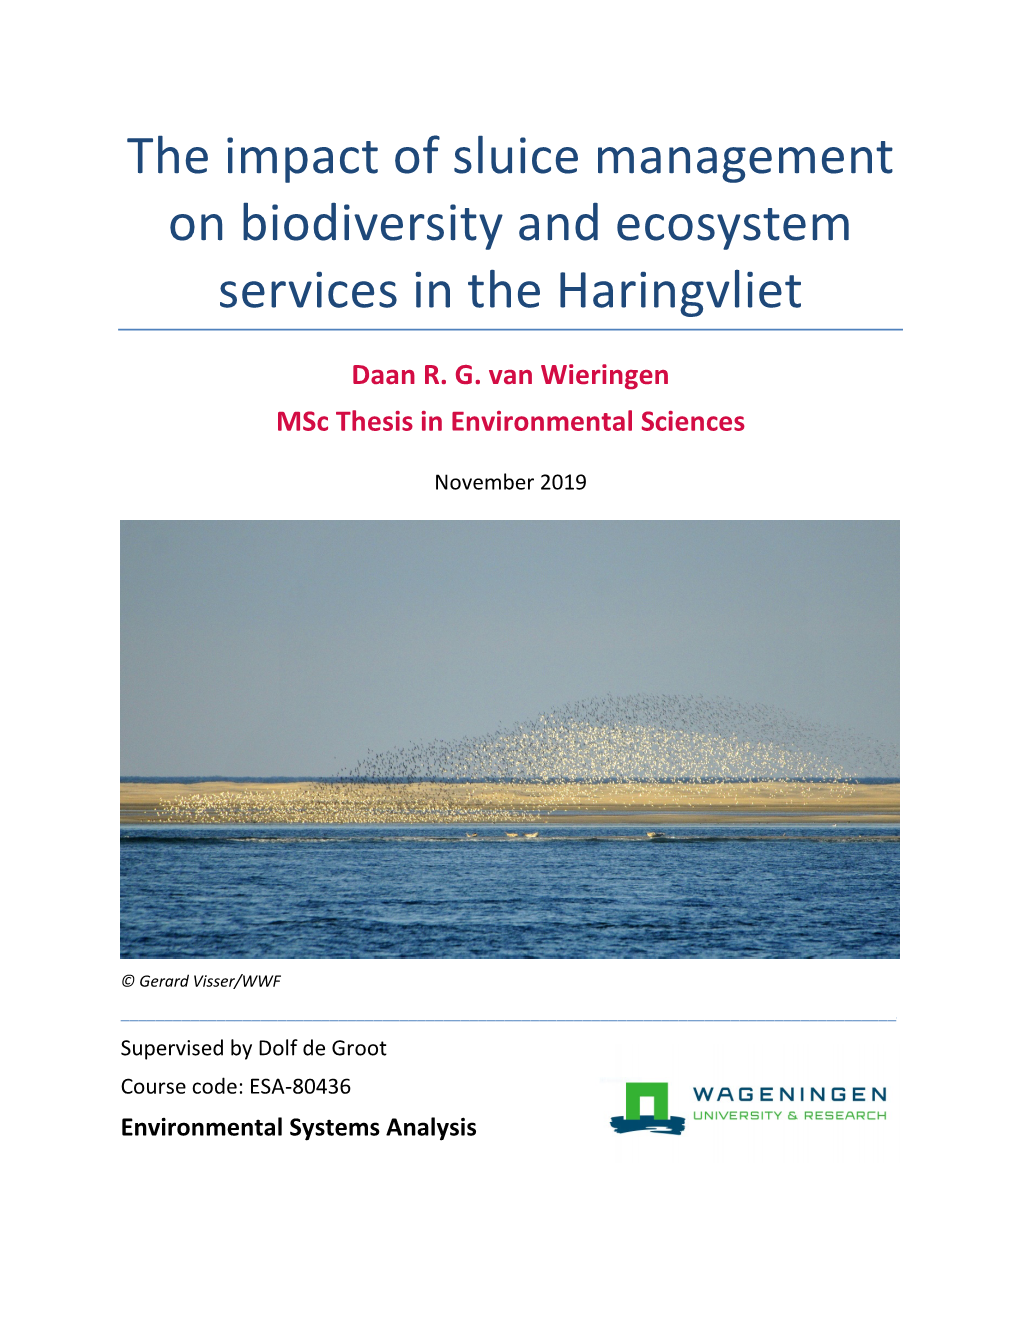 The Impact of Sluice Management on Biodiversity and Ecosystem Services in the Haringvliet